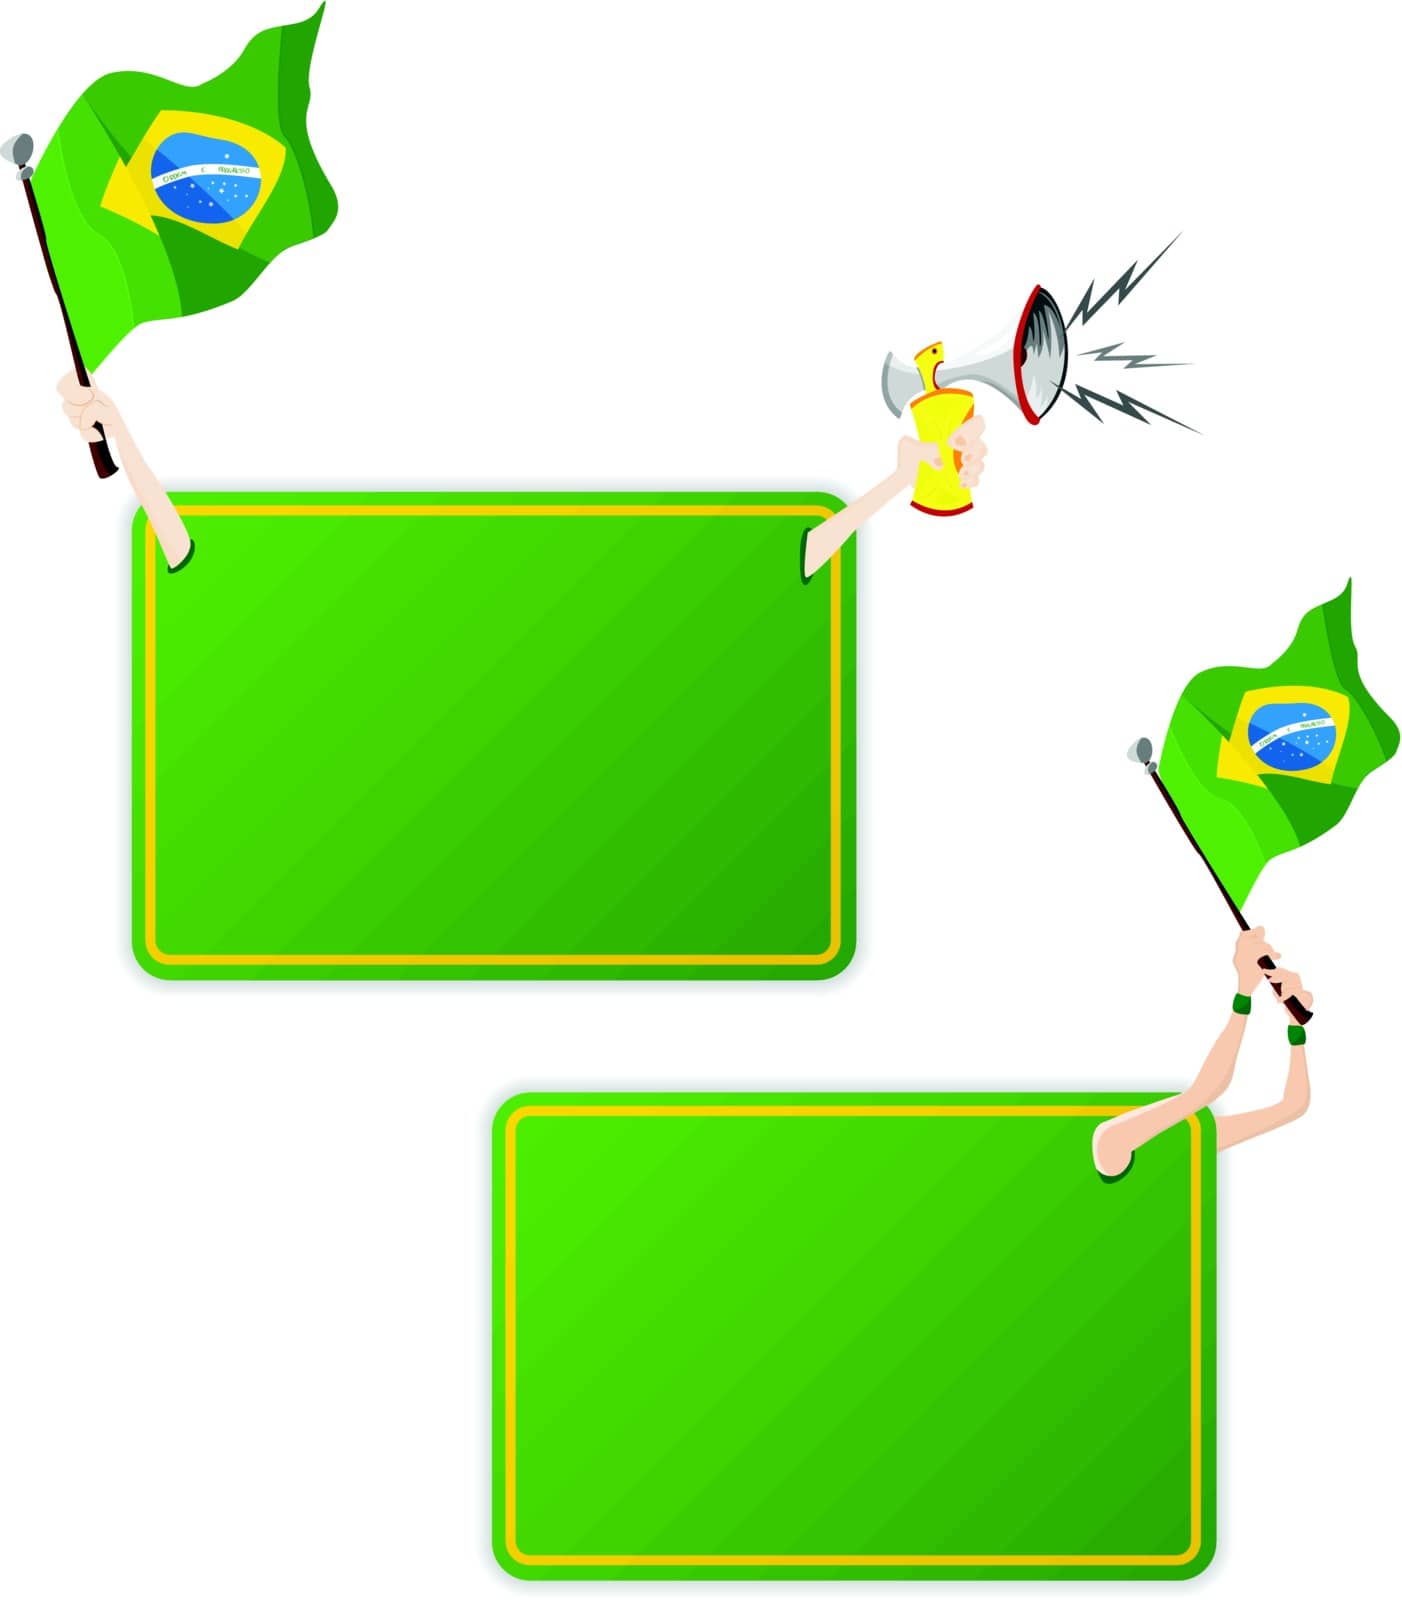 Brazil Sport Message Frame with Flag. Set of Two by gubh83